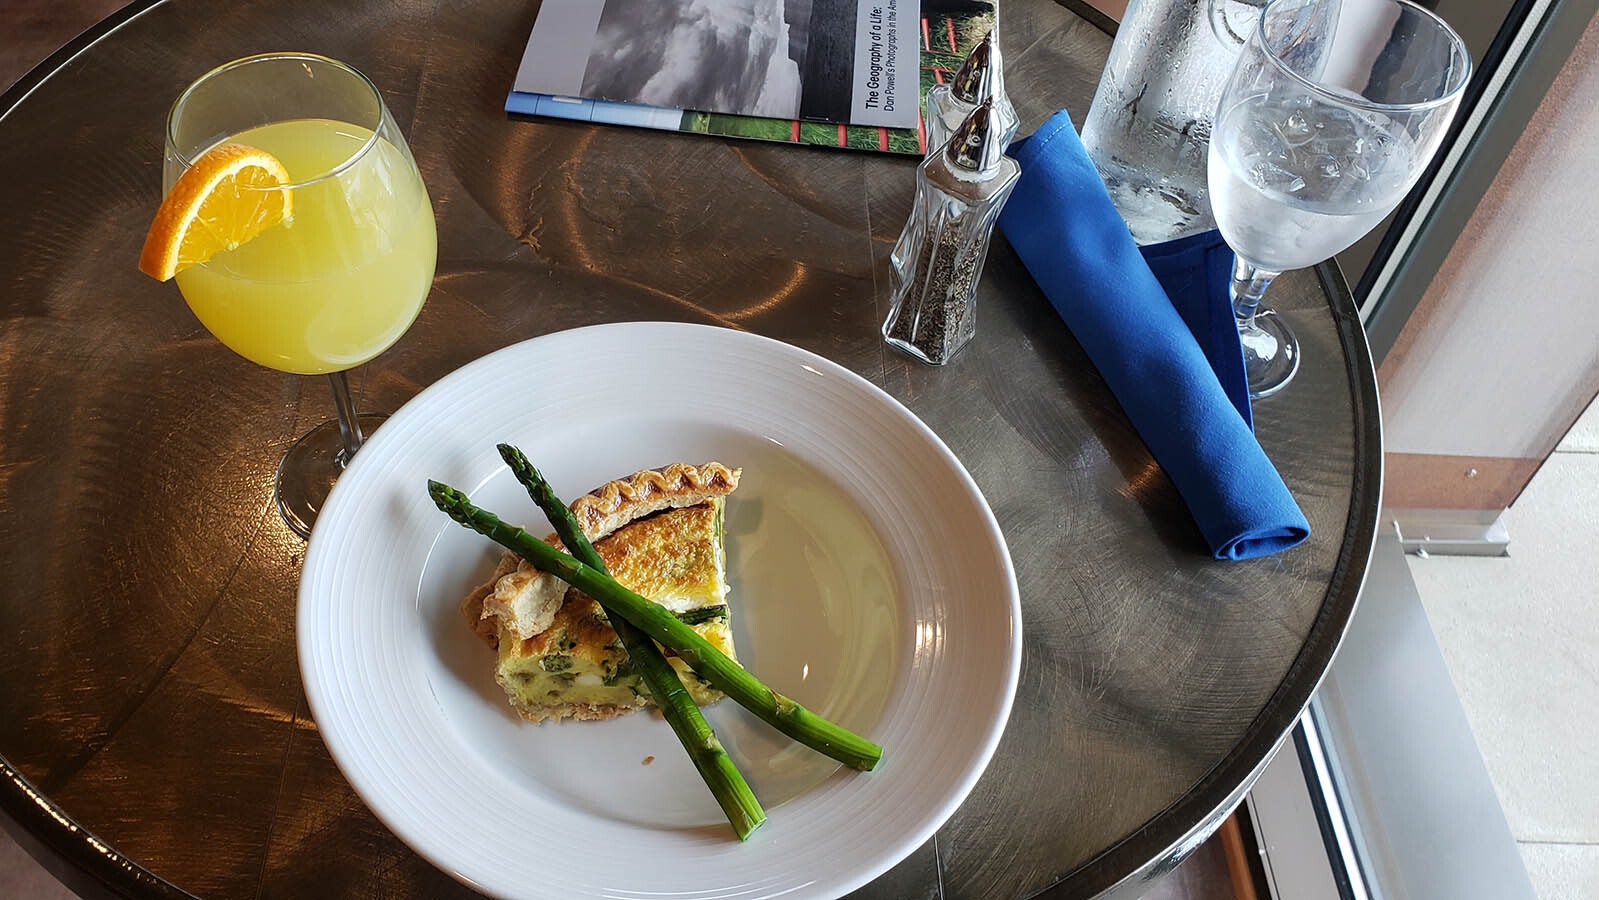 Brunch at the Brinton Bistro this day was quiche with a mimosa.